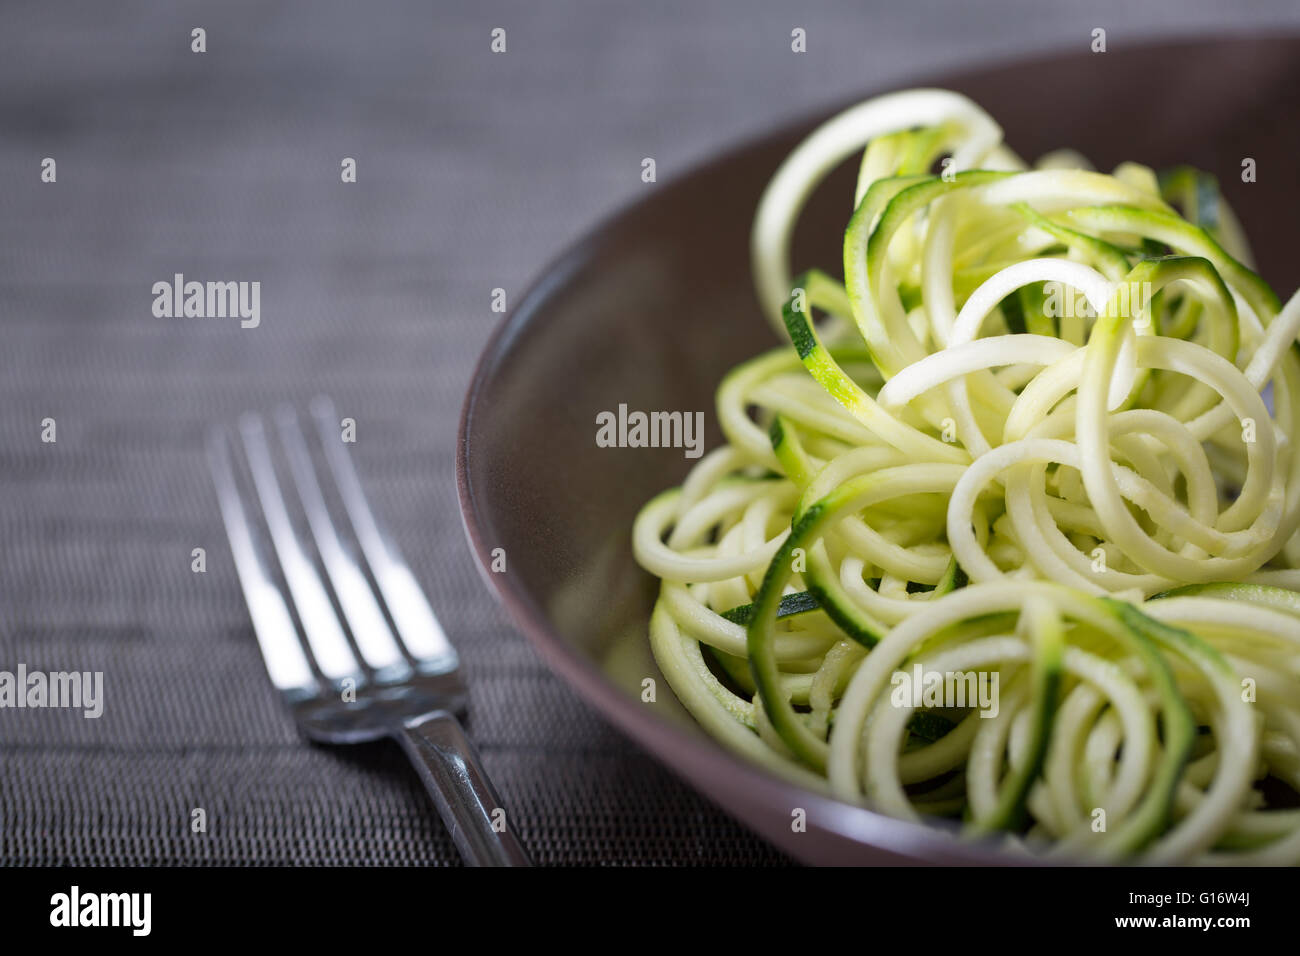 A bowl of courgette (Zucchini) noodles (spaghetti) made using a spiralizer Stock Photo